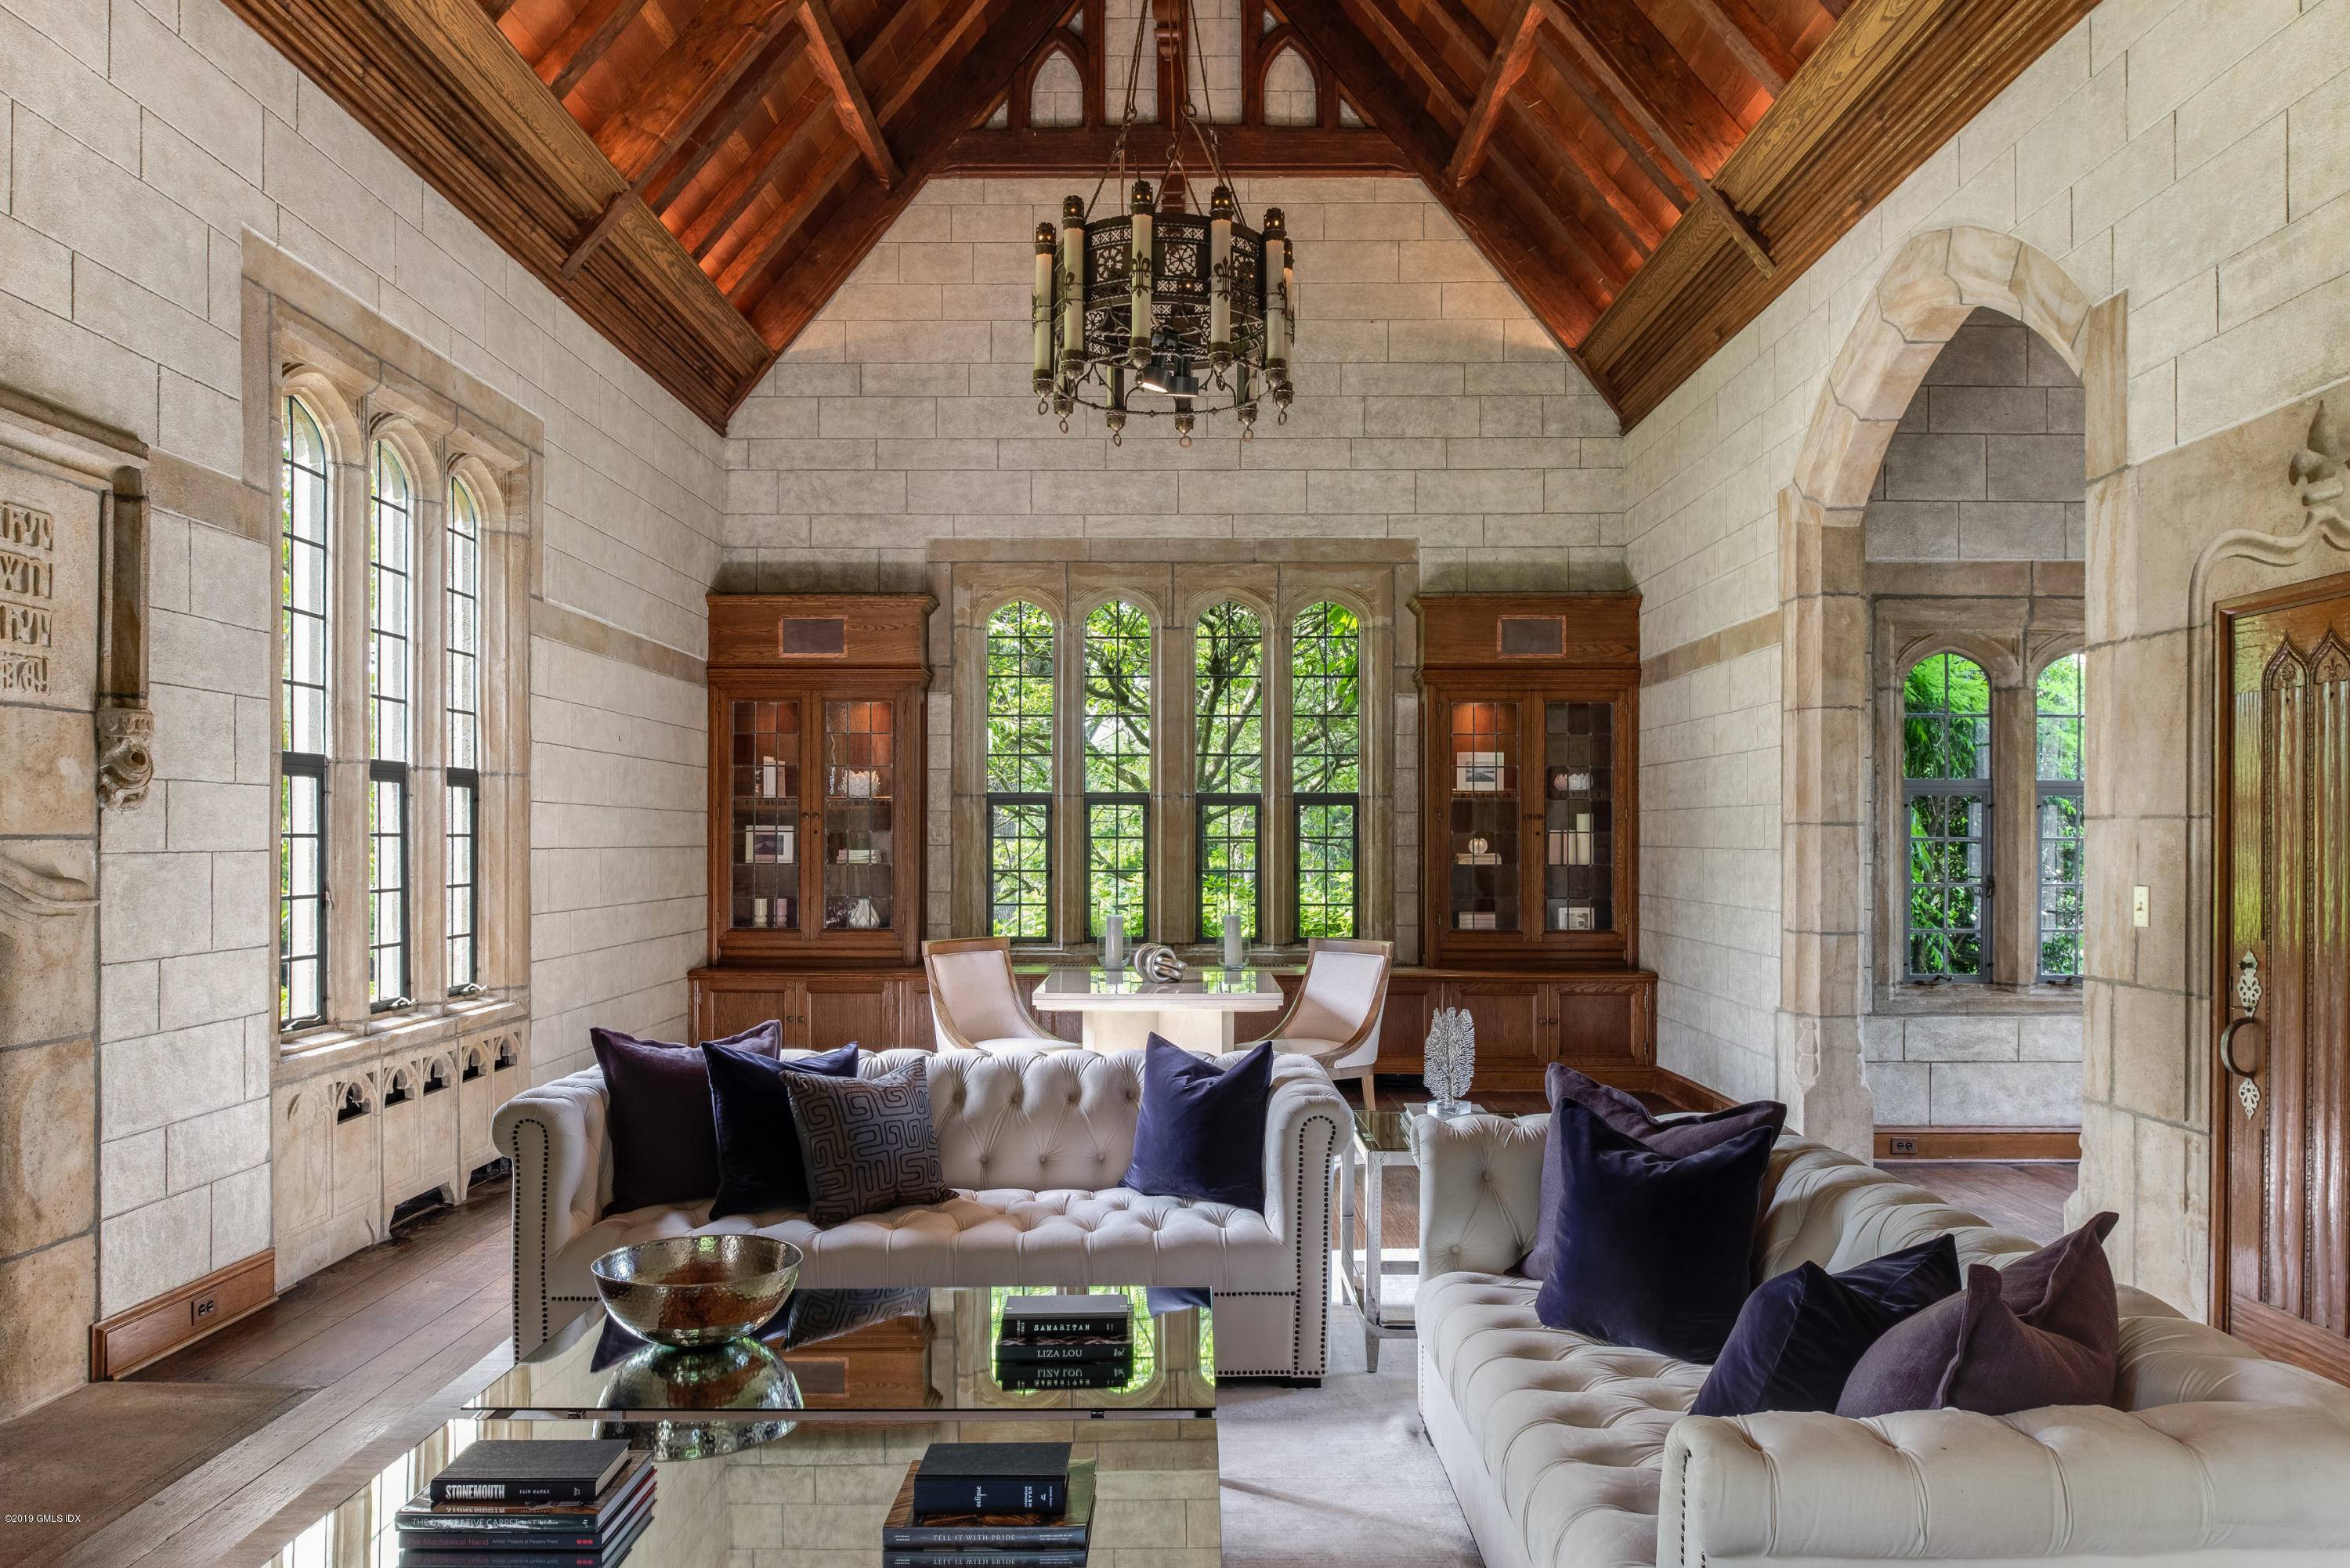 On a quiet, private lane this exquisite estate is a stunning one of a kind architectural showcase evoking european grandeur and sophistication.